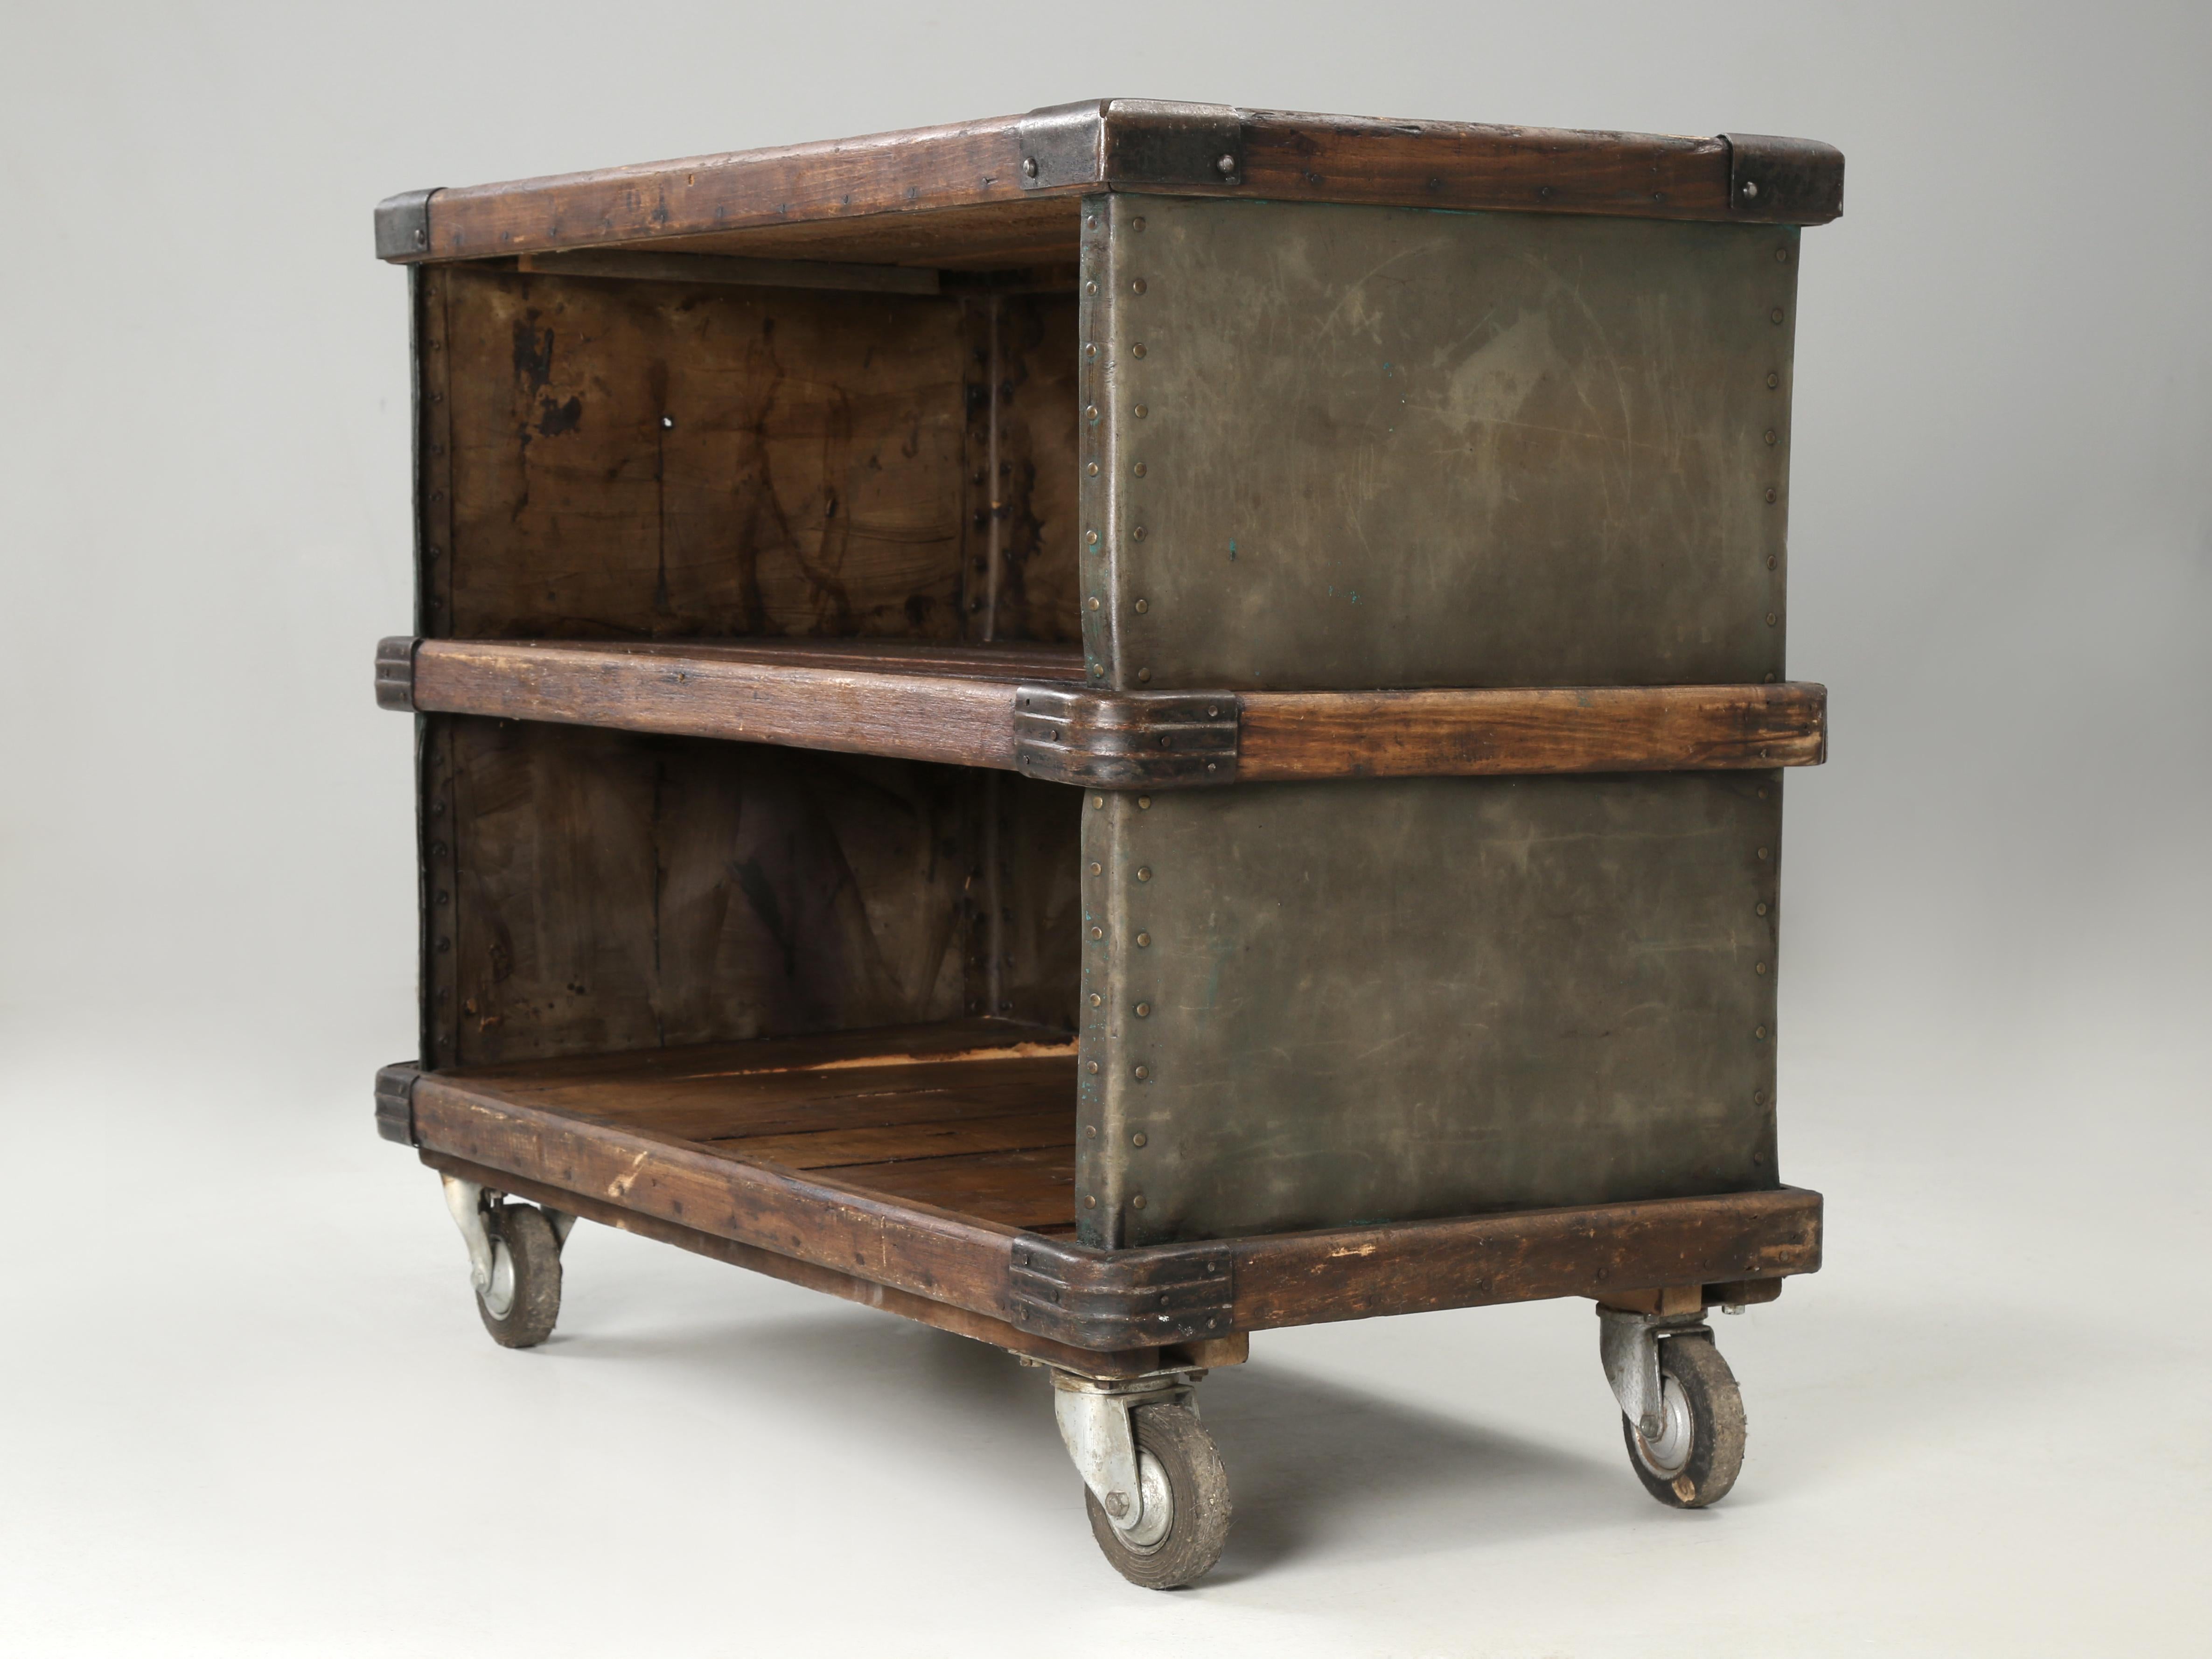 Country French Repurposed Mobile Suroy Storage Container into a Bar Cart or Office Cart